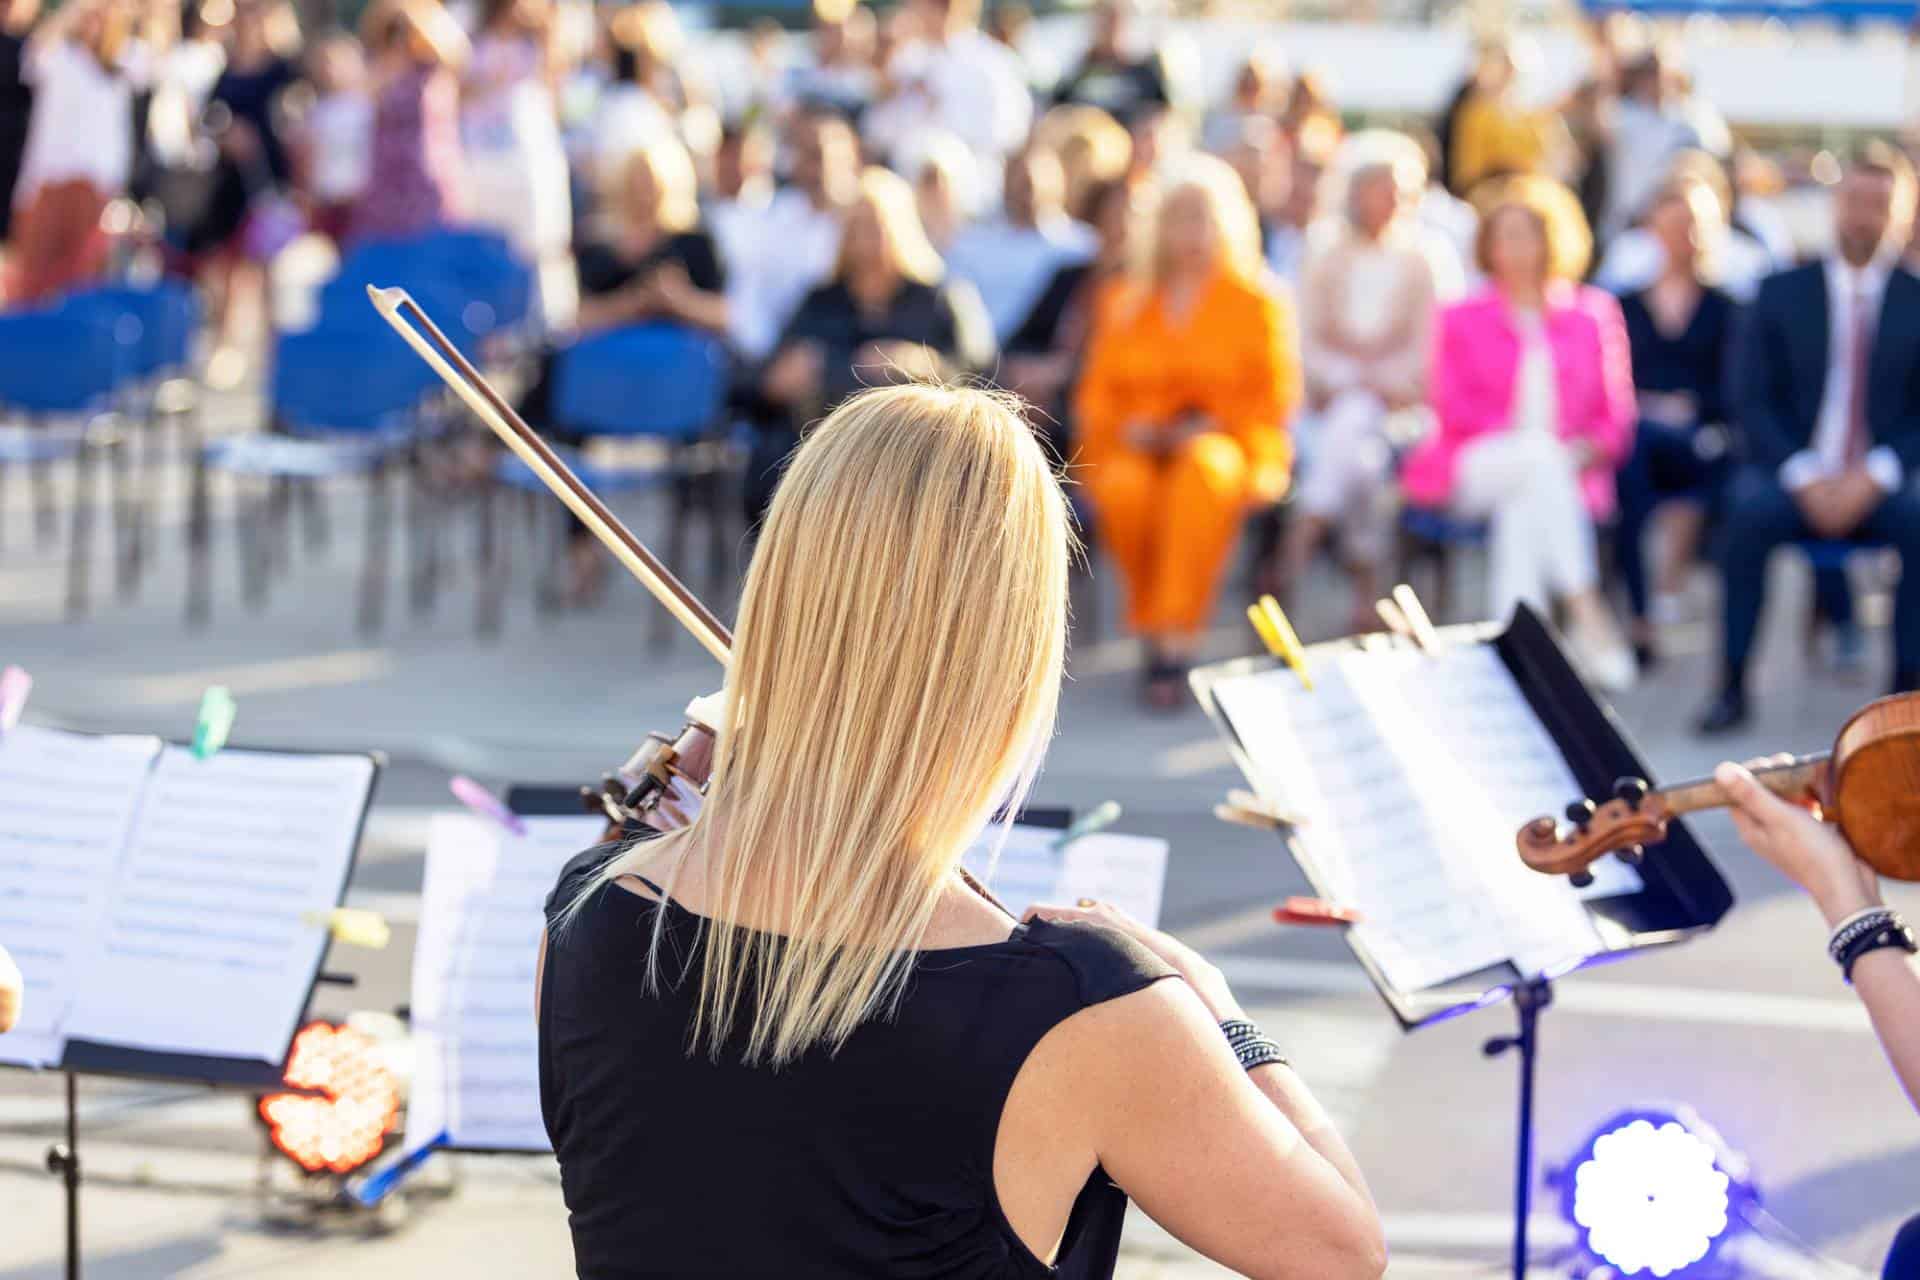 Outdoor classical music concert with audience in the background.